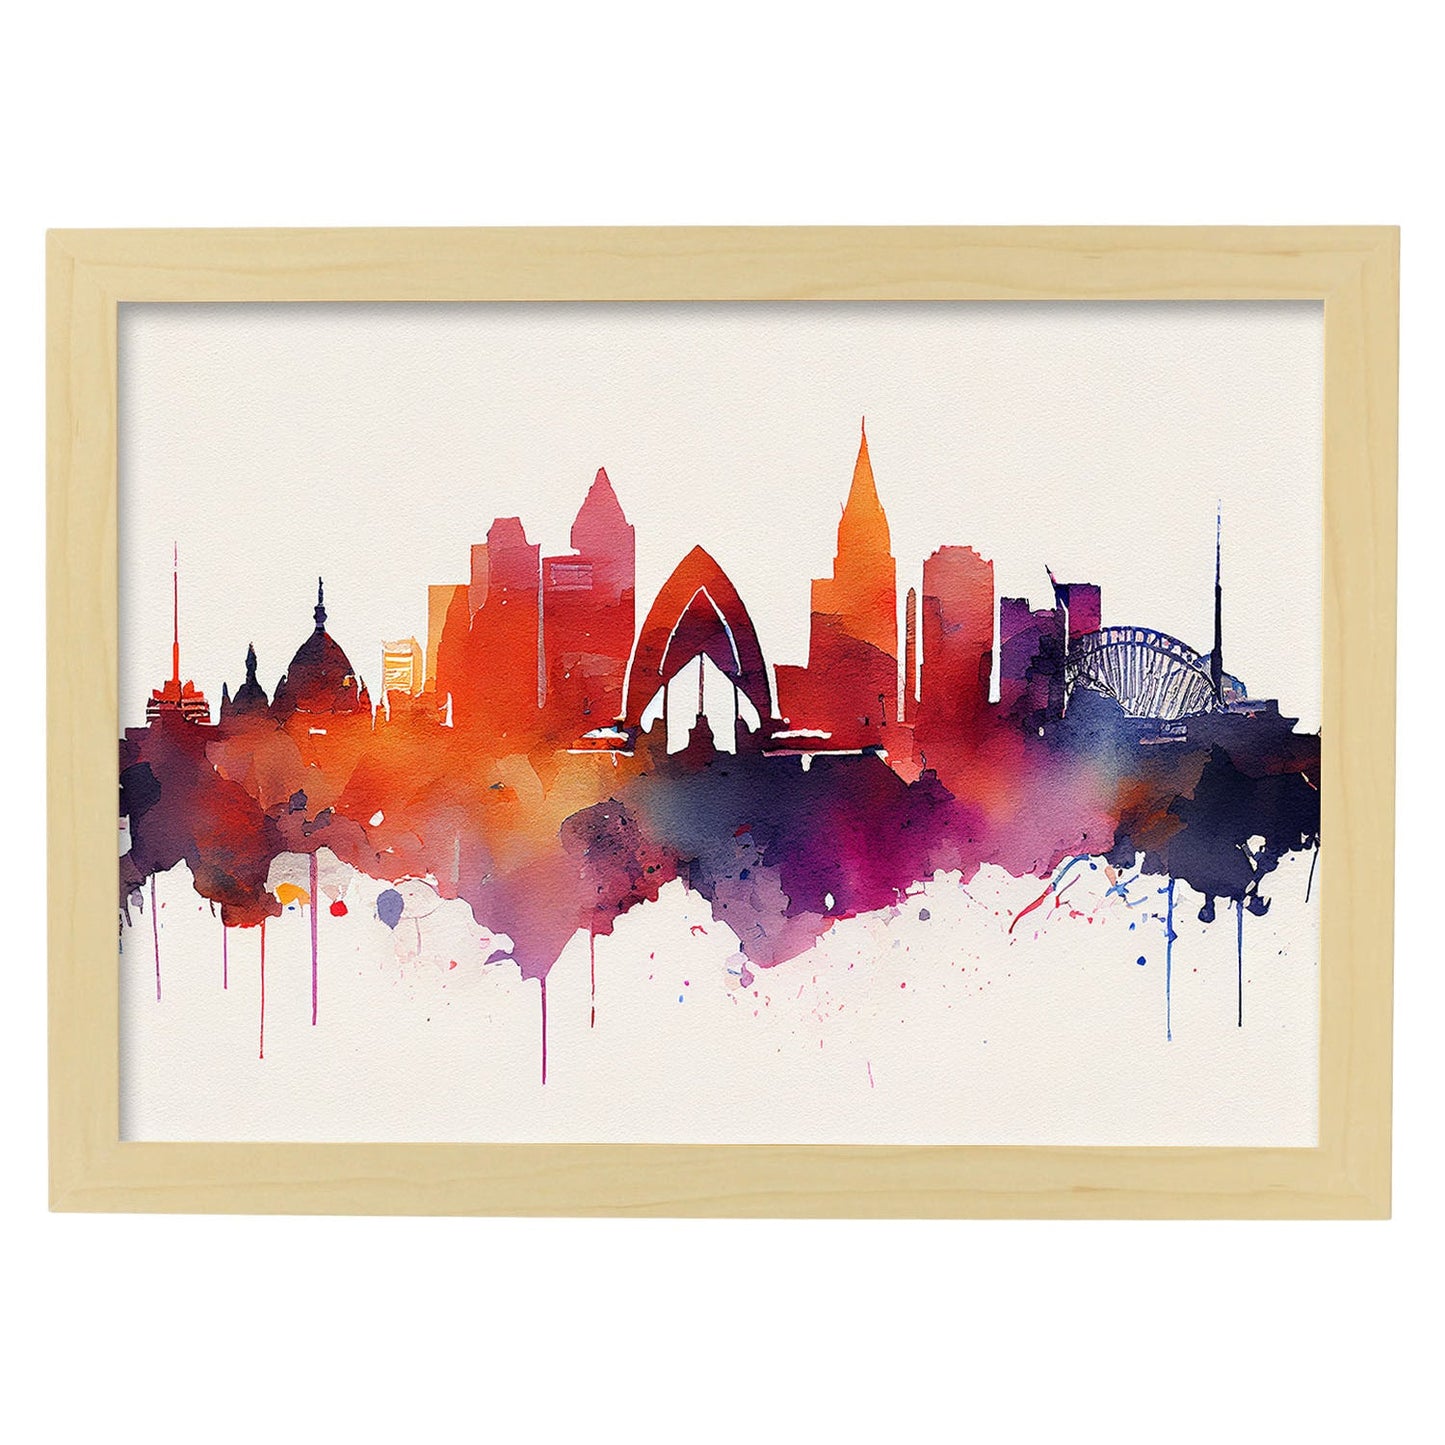 Nacnic watercolor of a skyline of the city of Sydney_2. Aesthetic Wall Art Prints for Bedroom or Living Room Design.-Artwork-Nacnic-A4-Marco Madera Clara-Nacnic Estudio SL